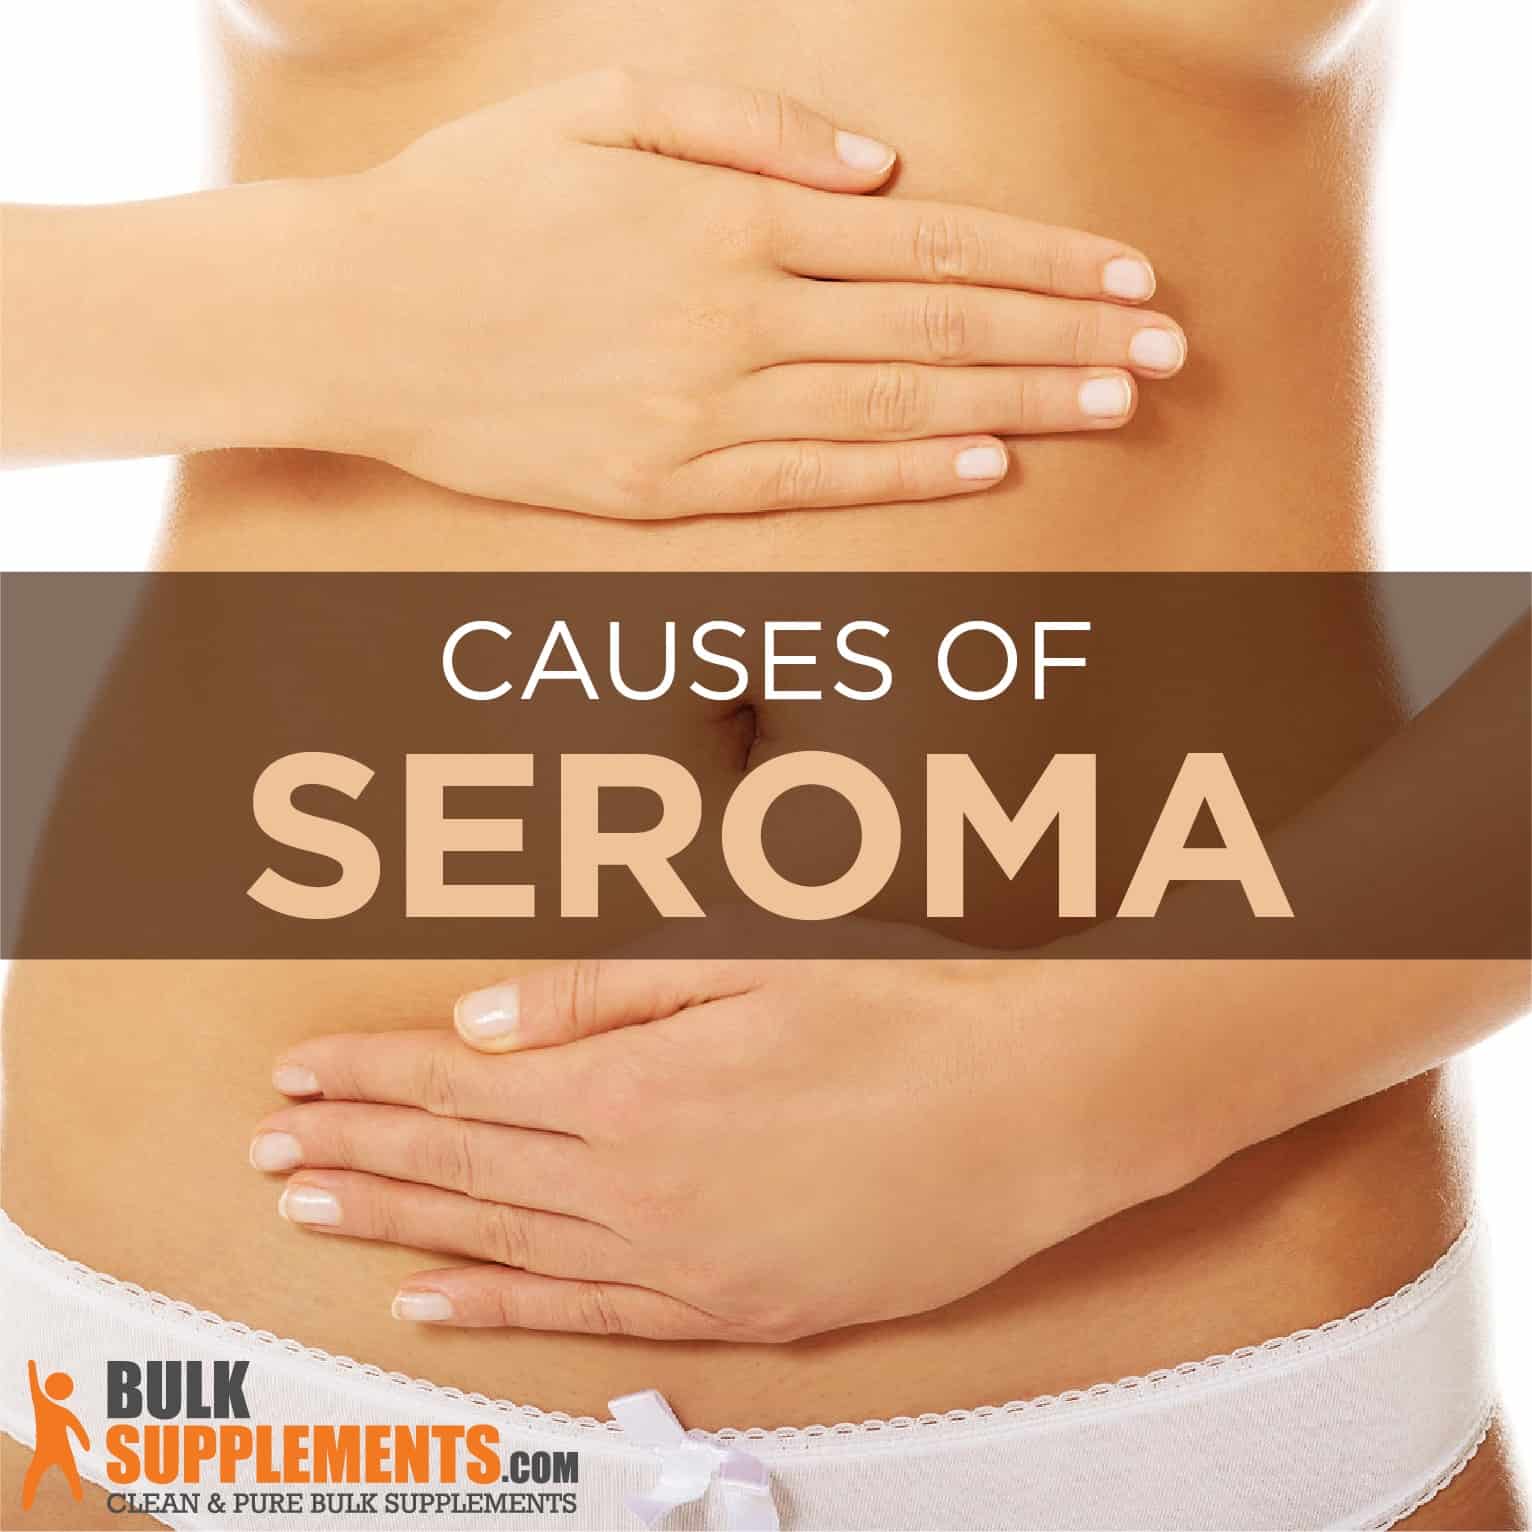 What is a Seroma Causes, Characteristics & Treatment